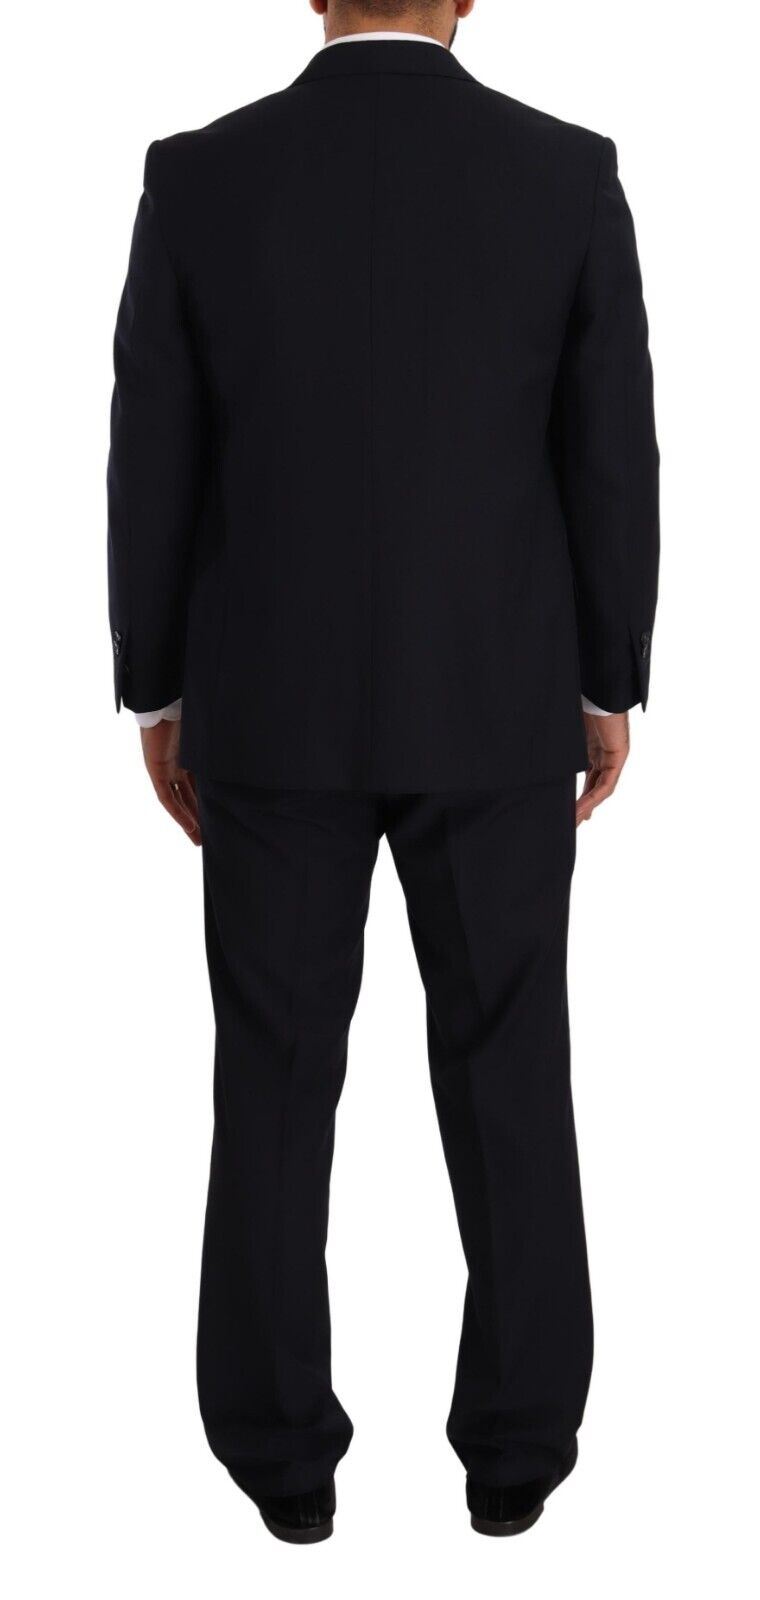 Blue Polyester Single Breasted Formal Suit